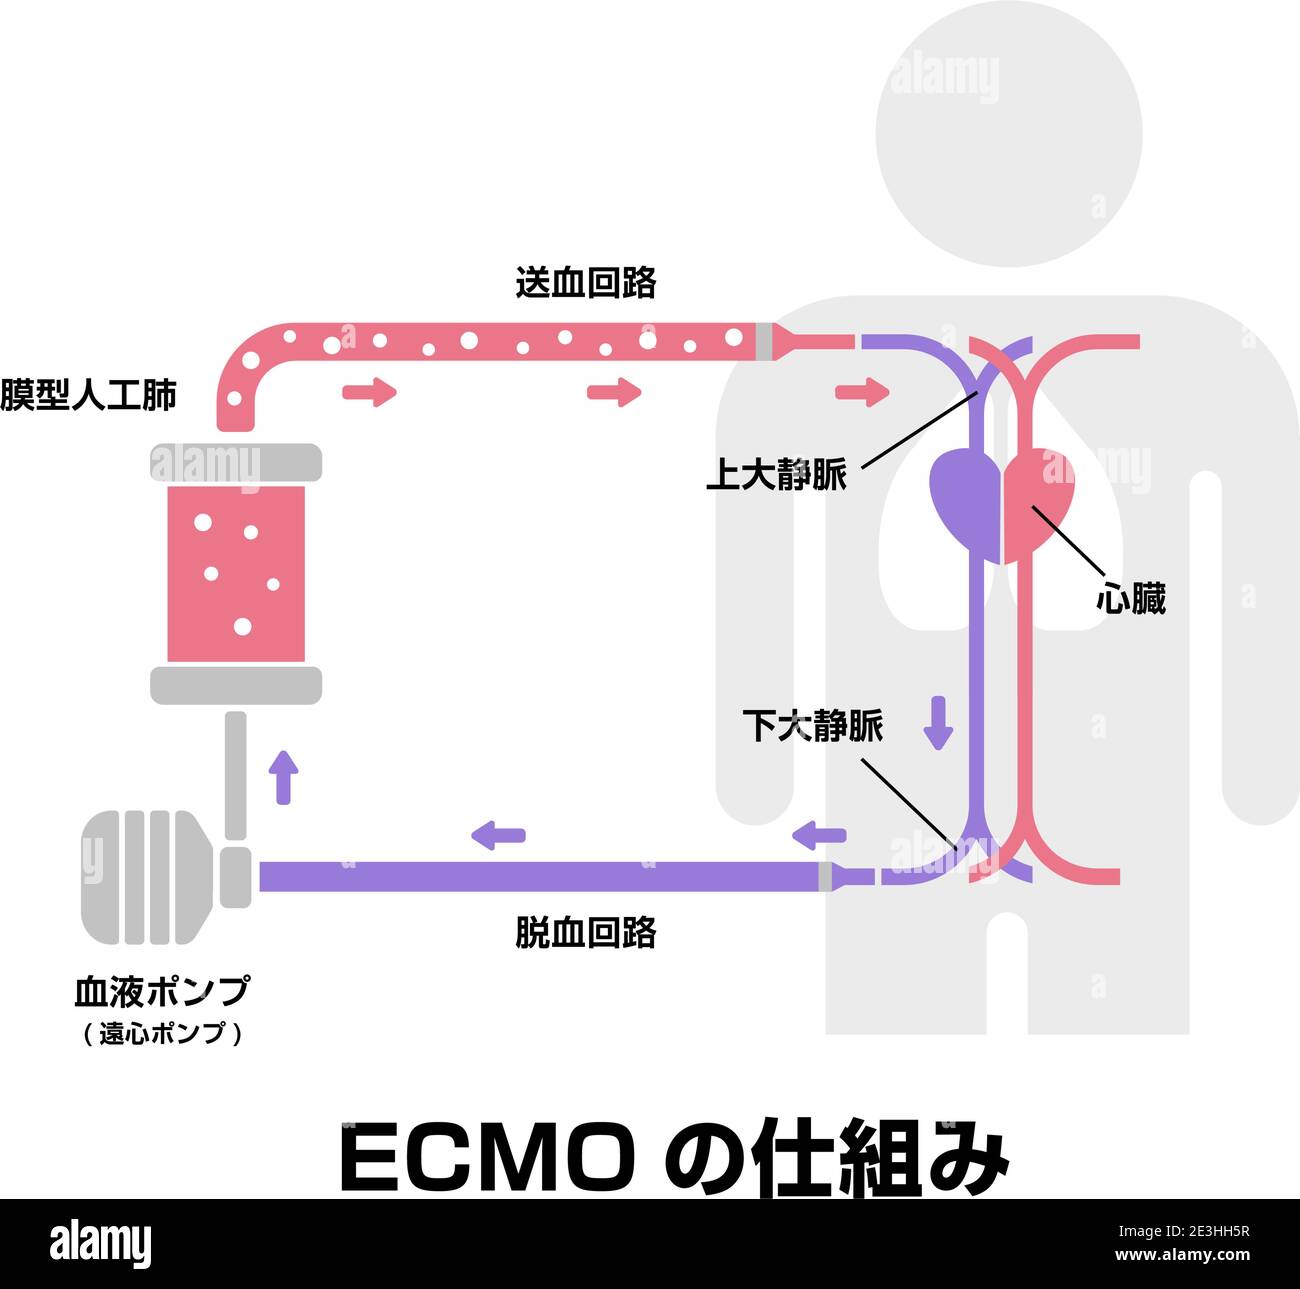 ECMO ( Extracorporeal membrane oxygenation ) structure vector illustration / Japanese Stock Vector